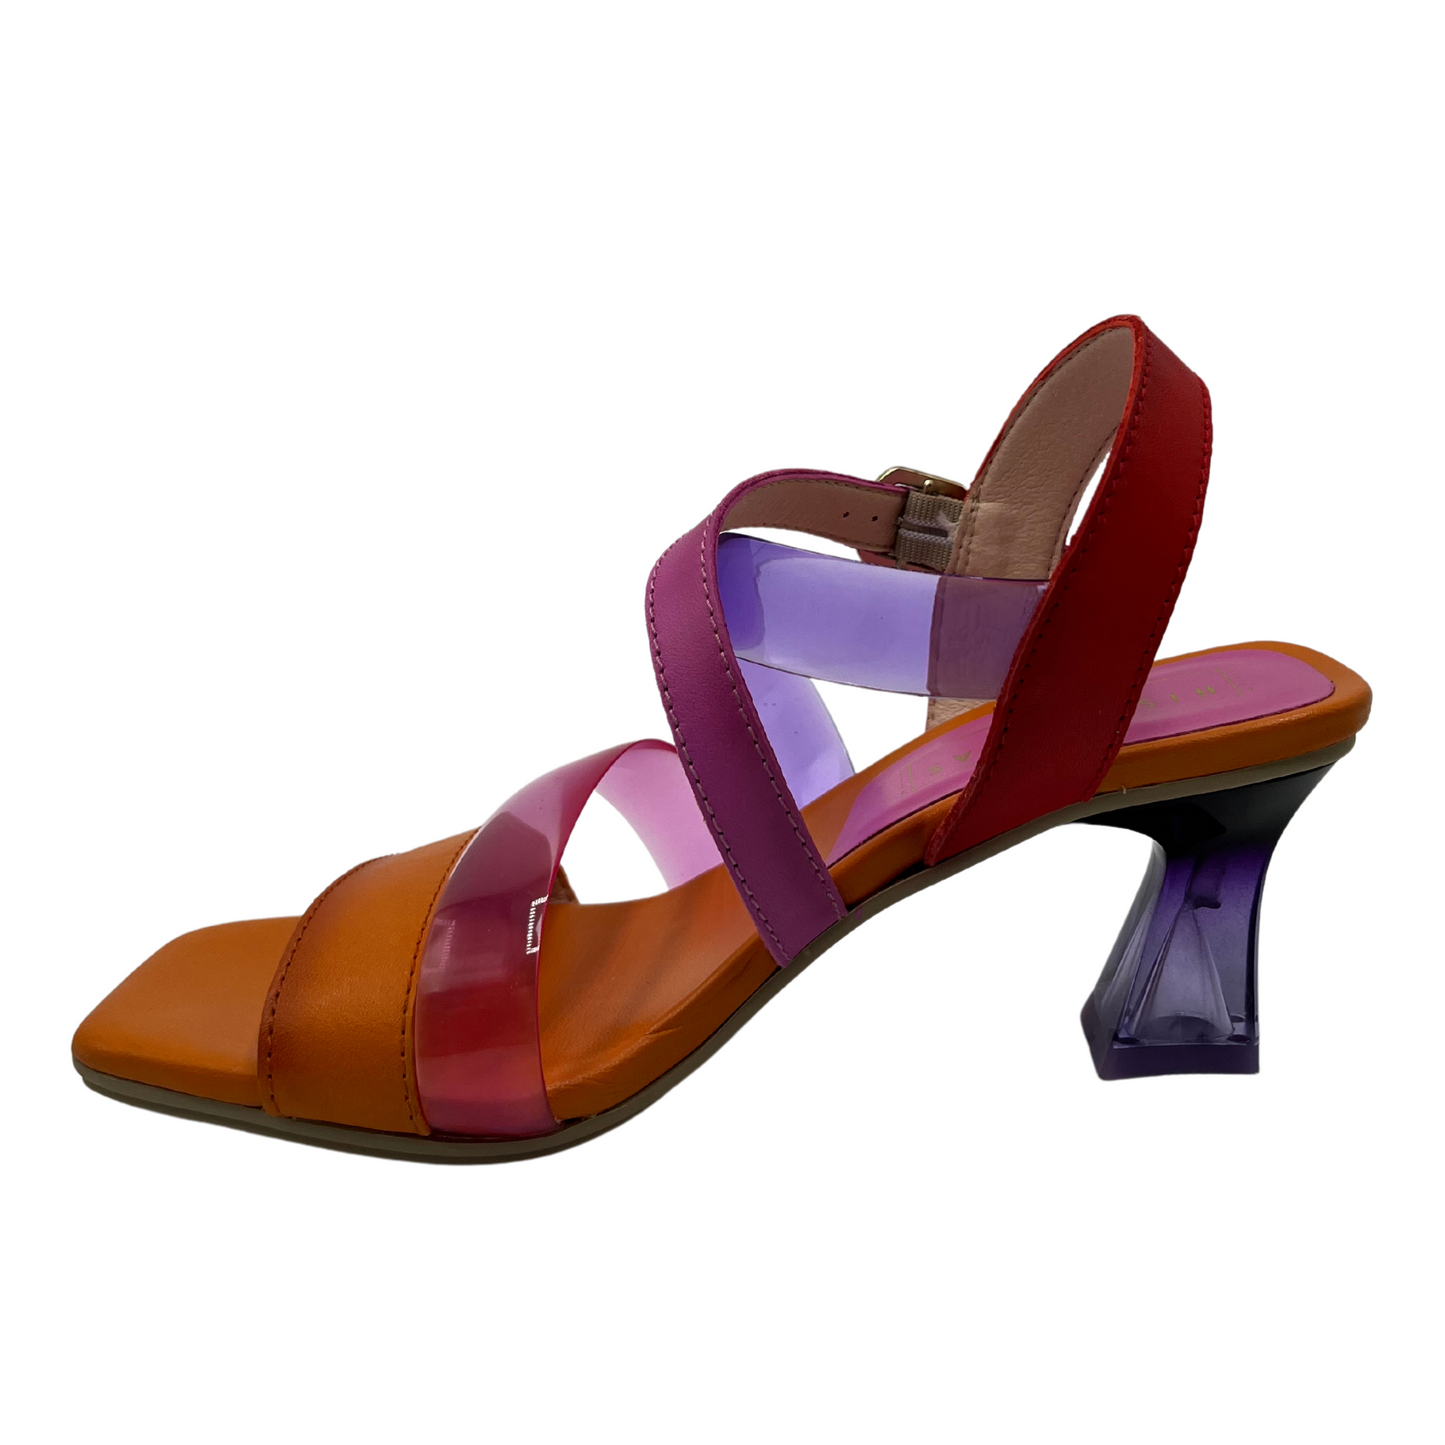 Left facing view of multi strap sandal with flared heel and square toe